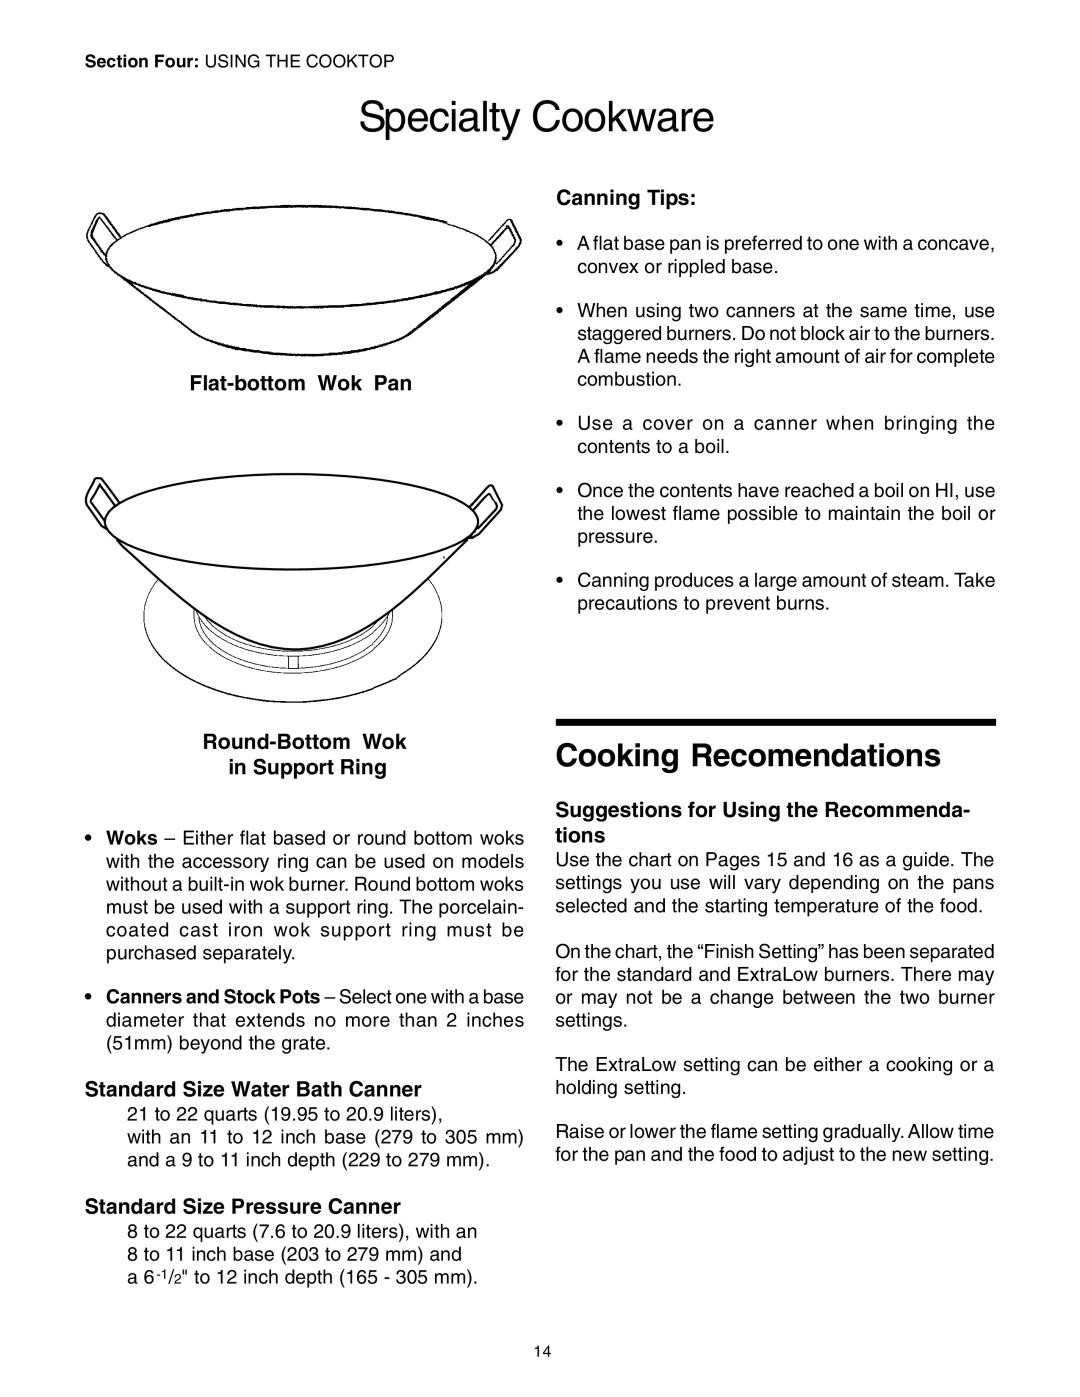 Thermador PRD36, PRD48, PRD30 Specialty Cookware, Cooking Recomendations, Canning Tips, Flat-bottom Wok Pan 